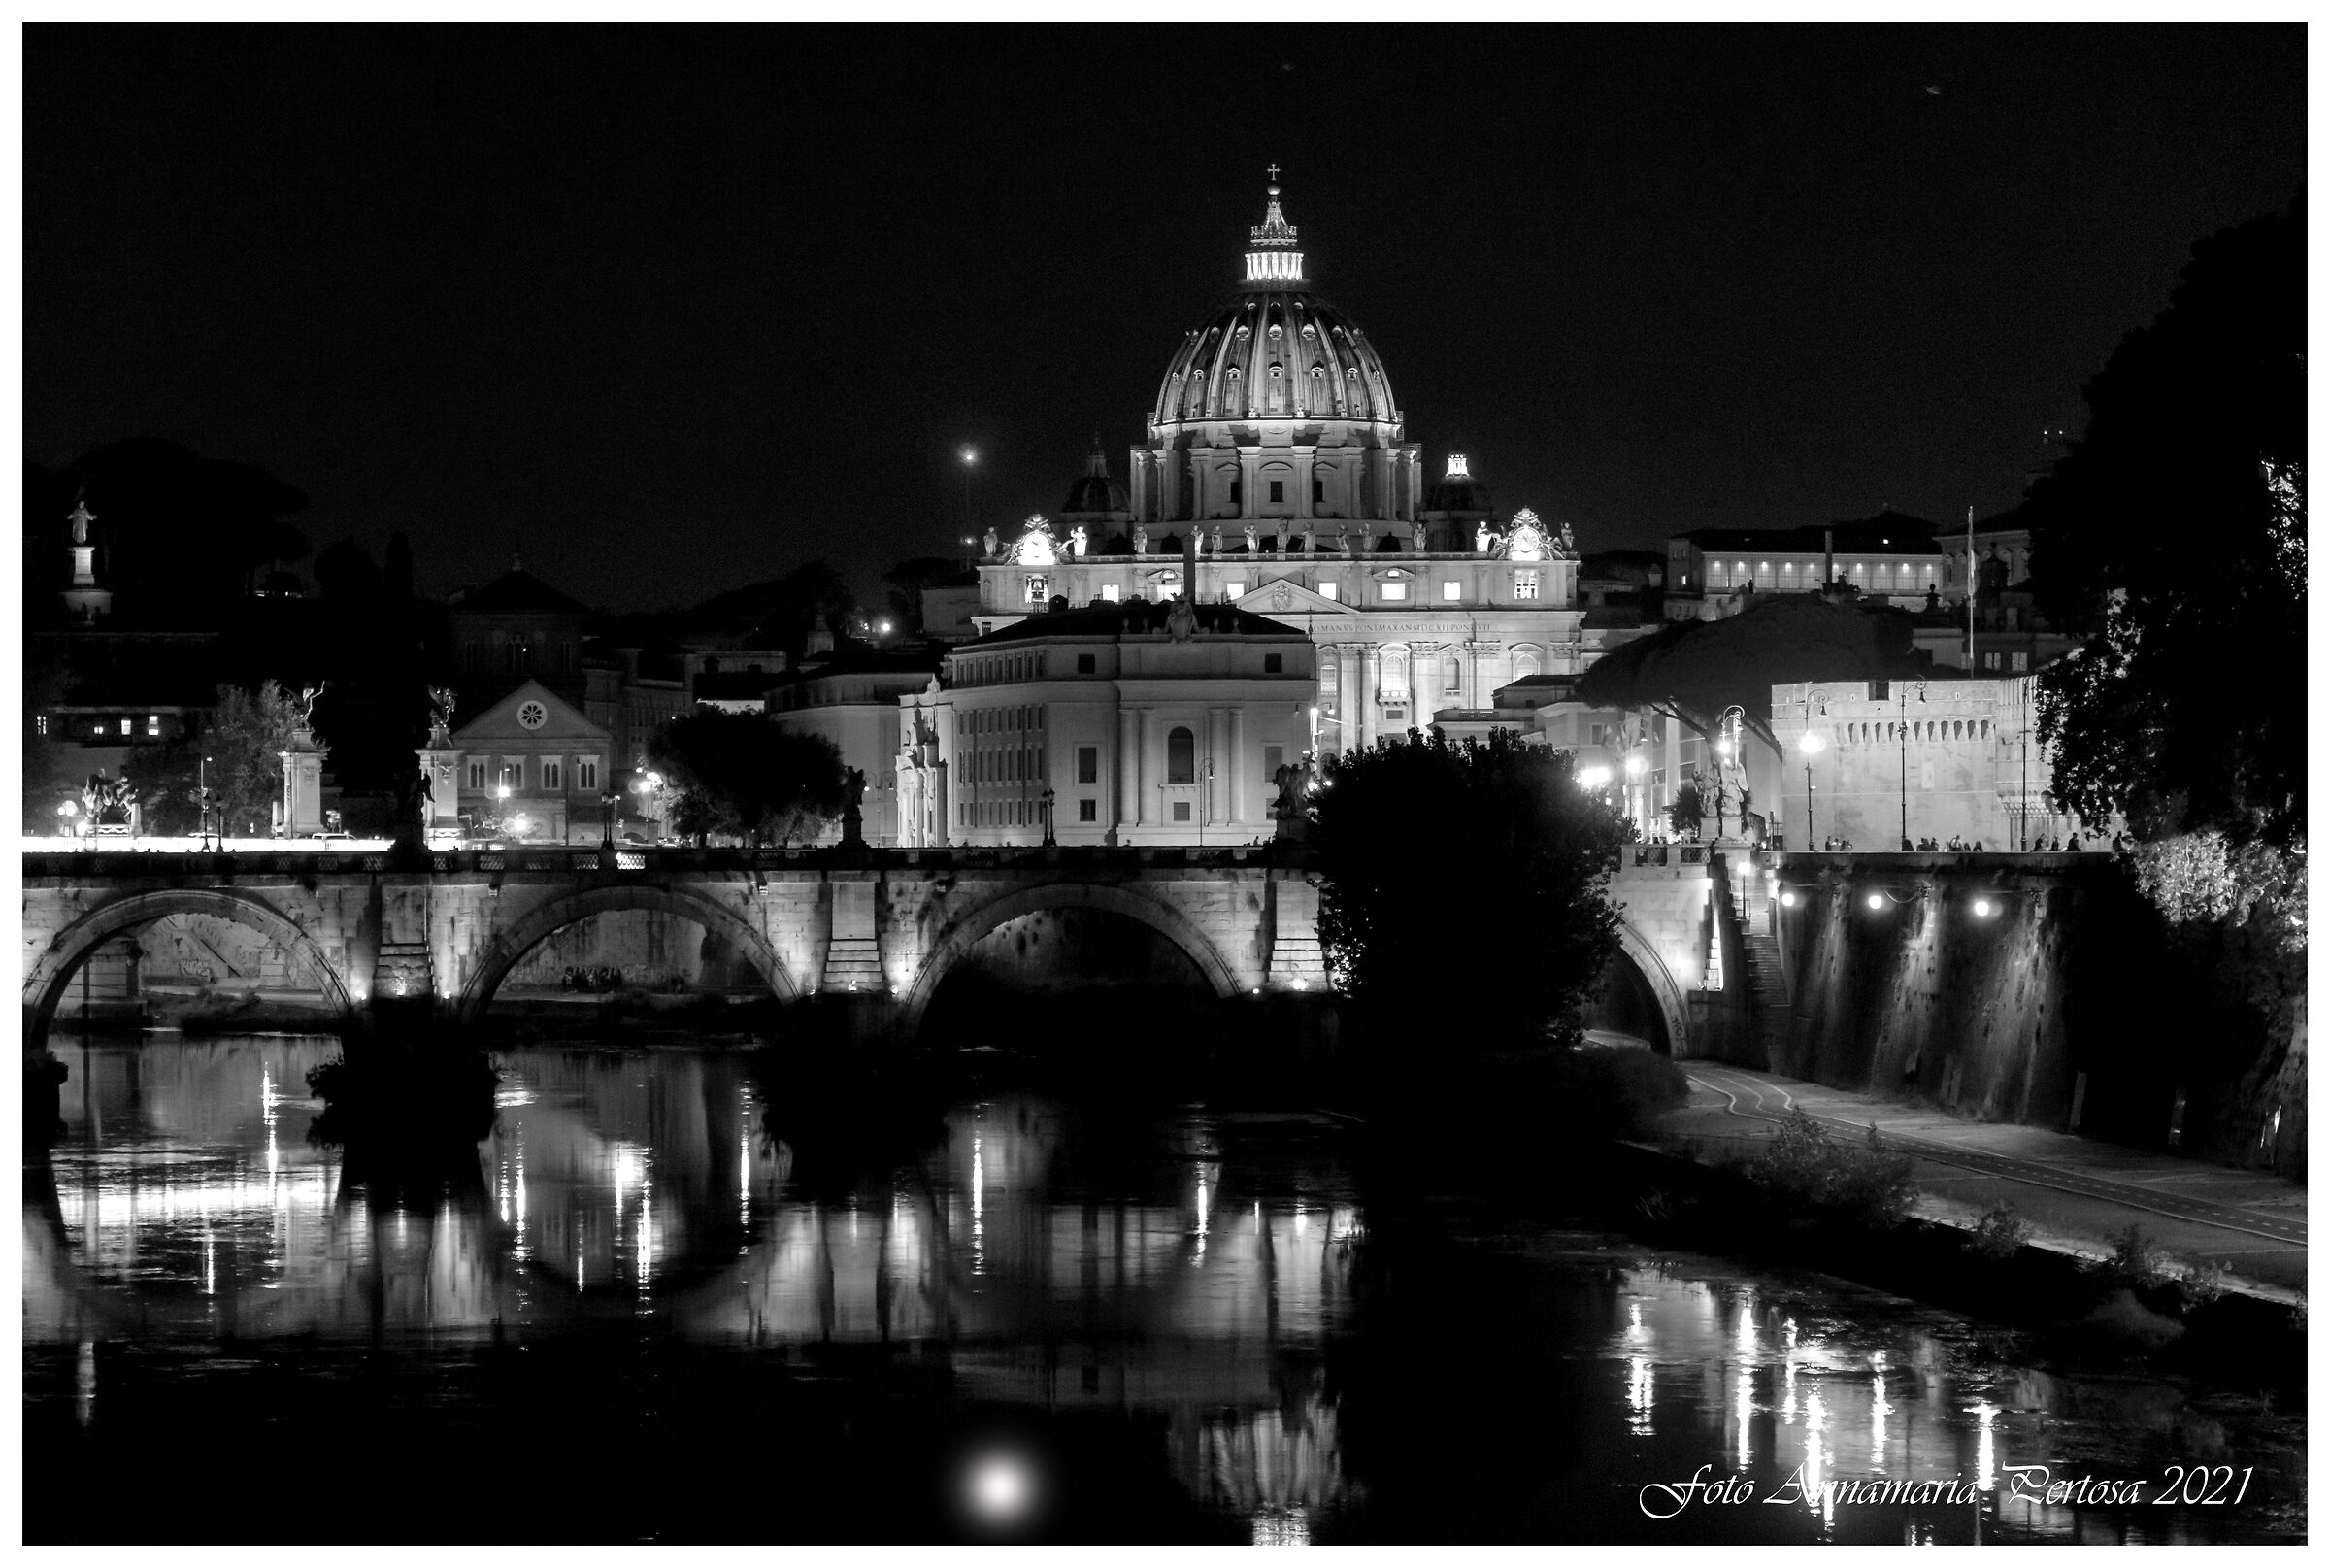 The Lungotevere and San Pietro...